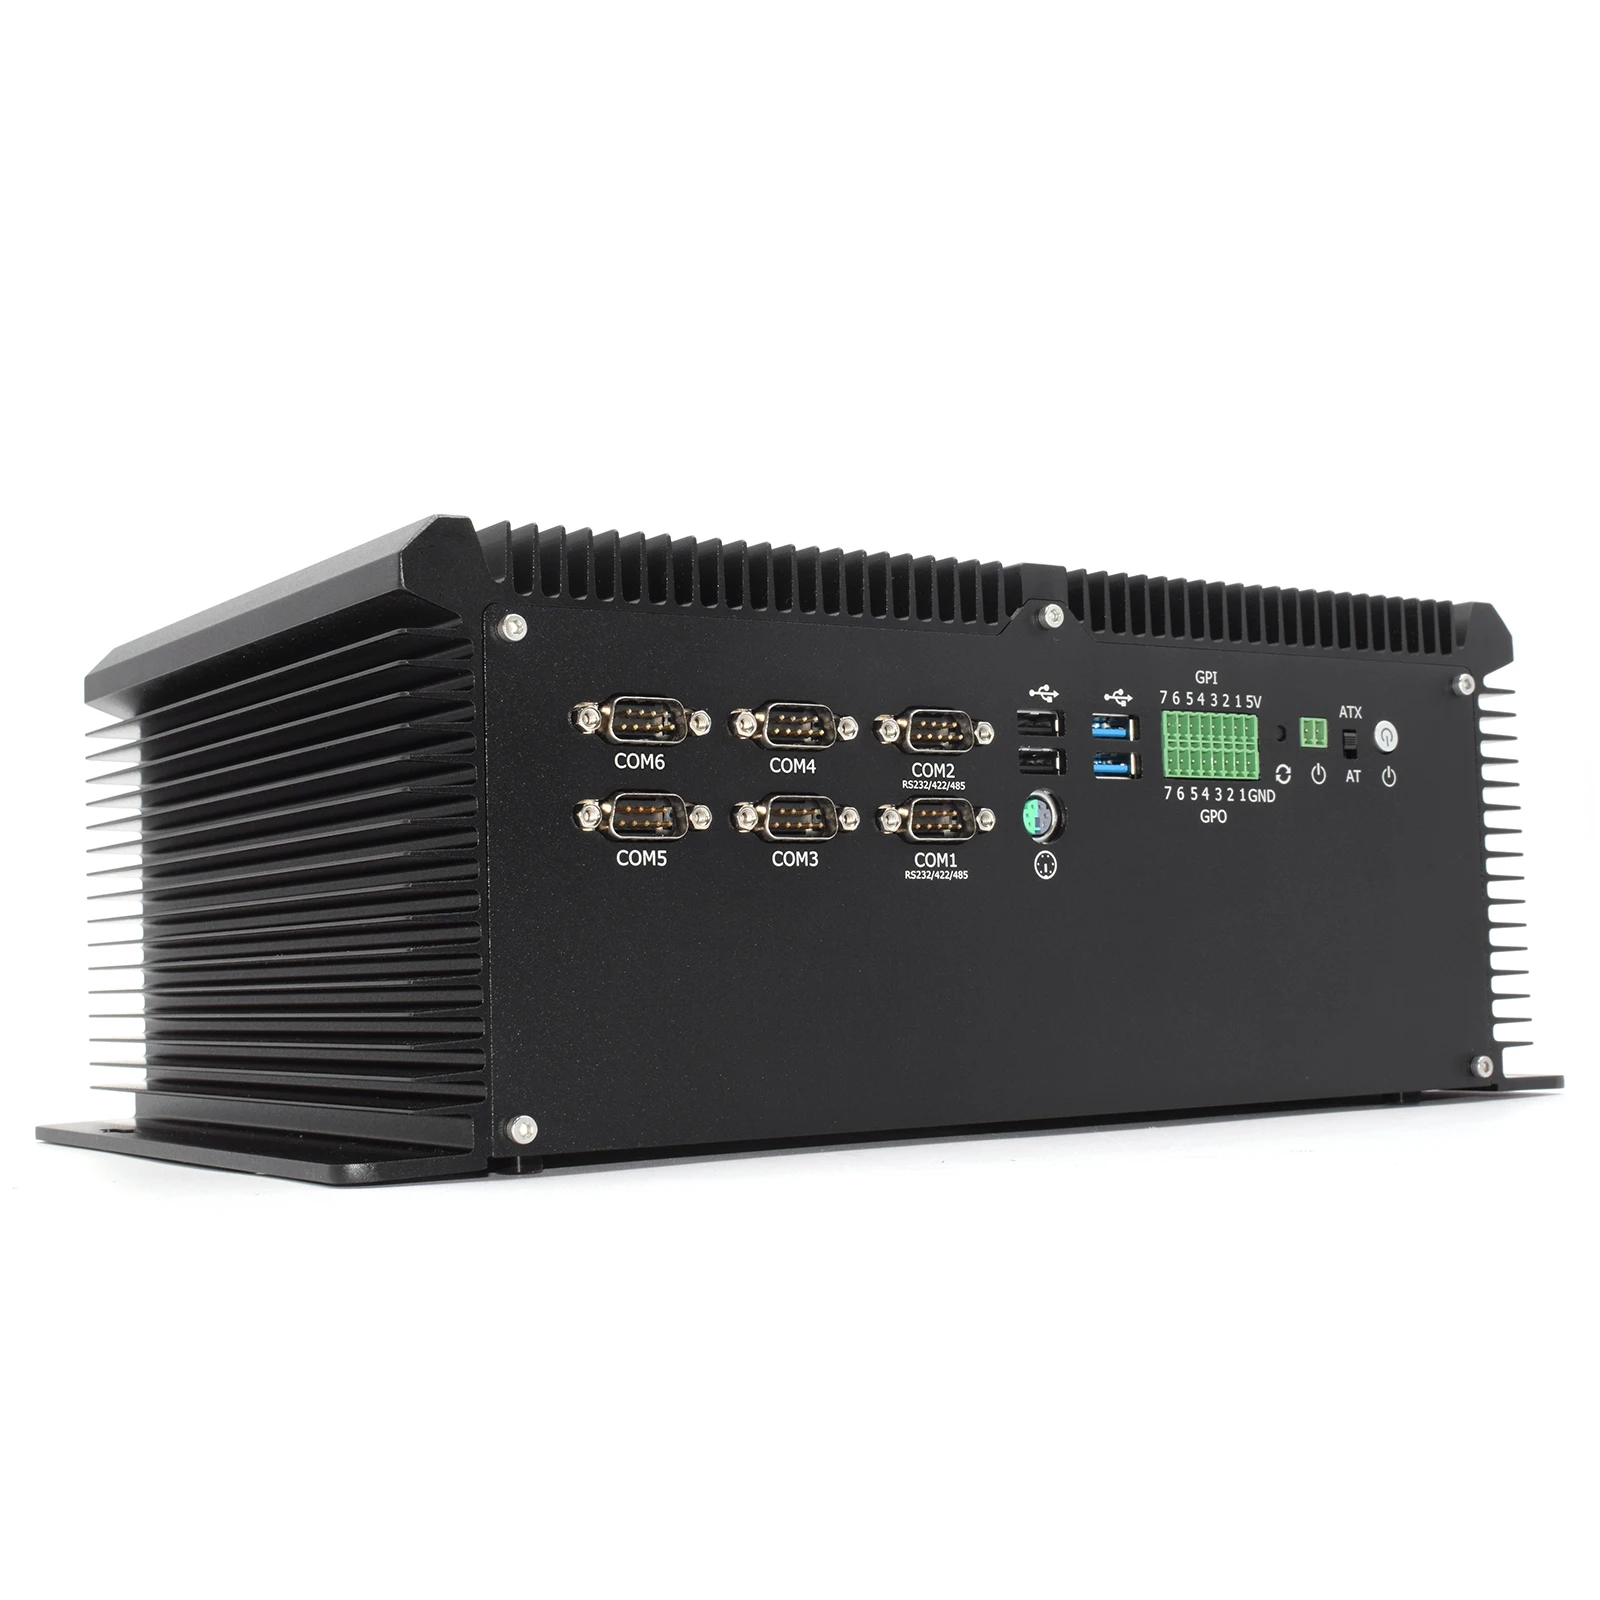 

Industrial Mini PC 4*POE Intel Core i7 7920HQ DDR4 3display win10pro Linux with PS2 GPIO port support 9-36v HD VGA DP